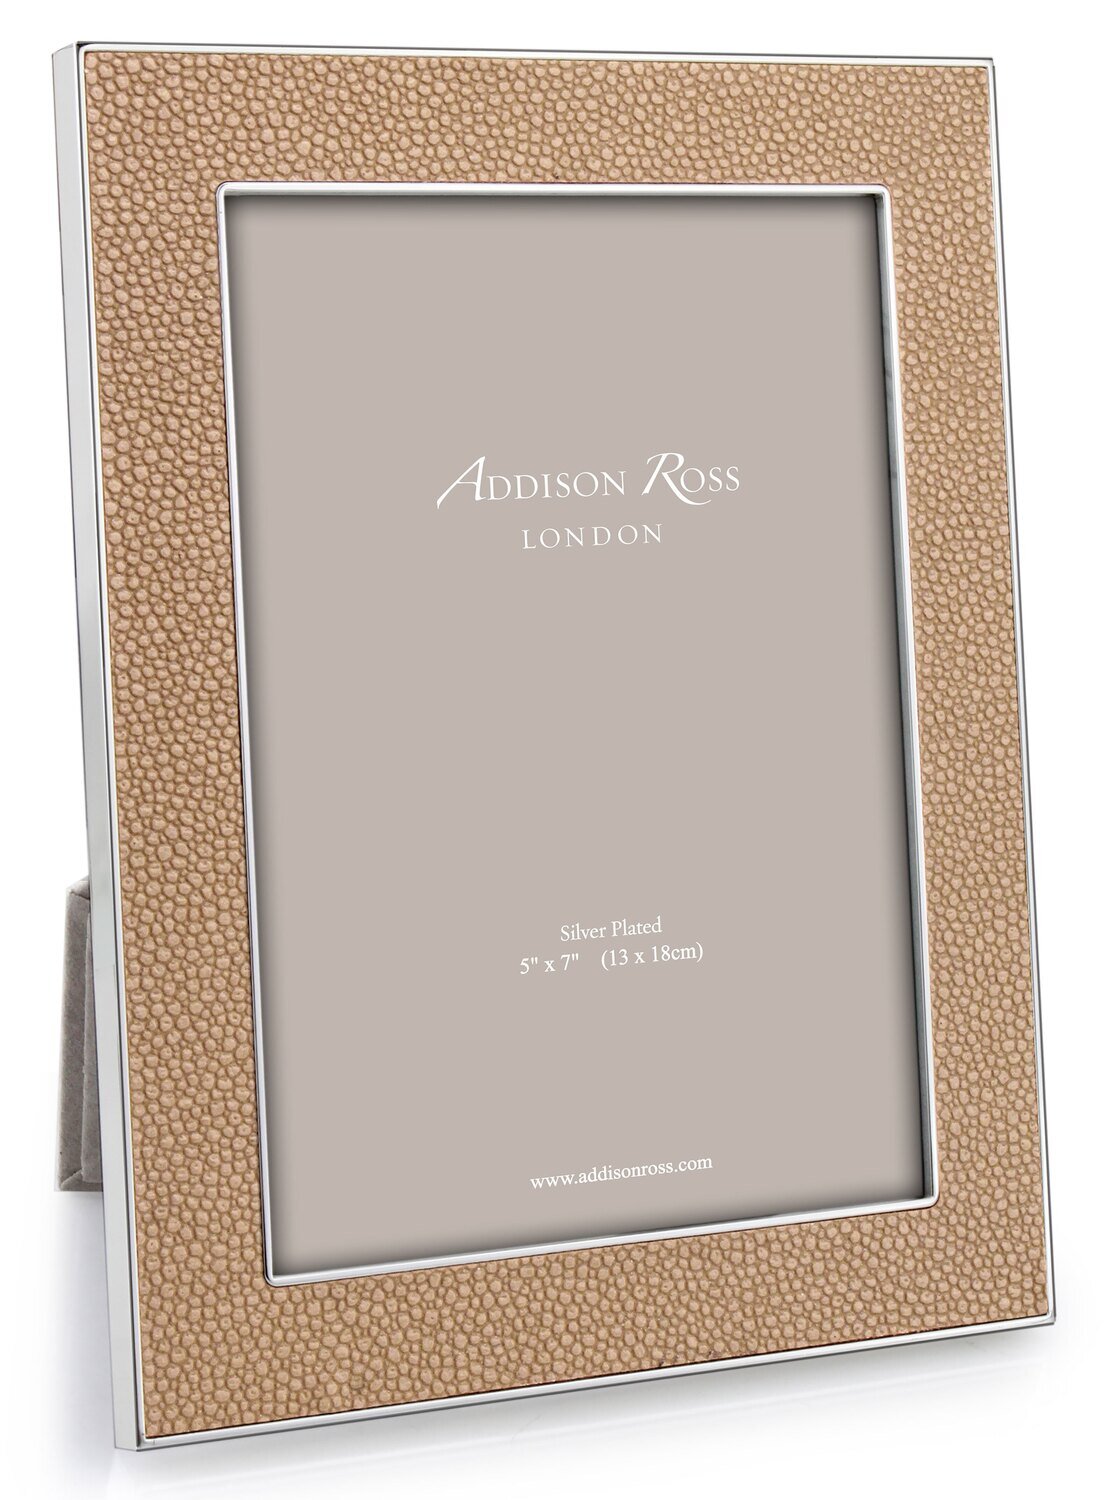 Addison Ross 8 x 10 Inch Faux Shagreen Sand Picture Frame Silver Plate FR1079